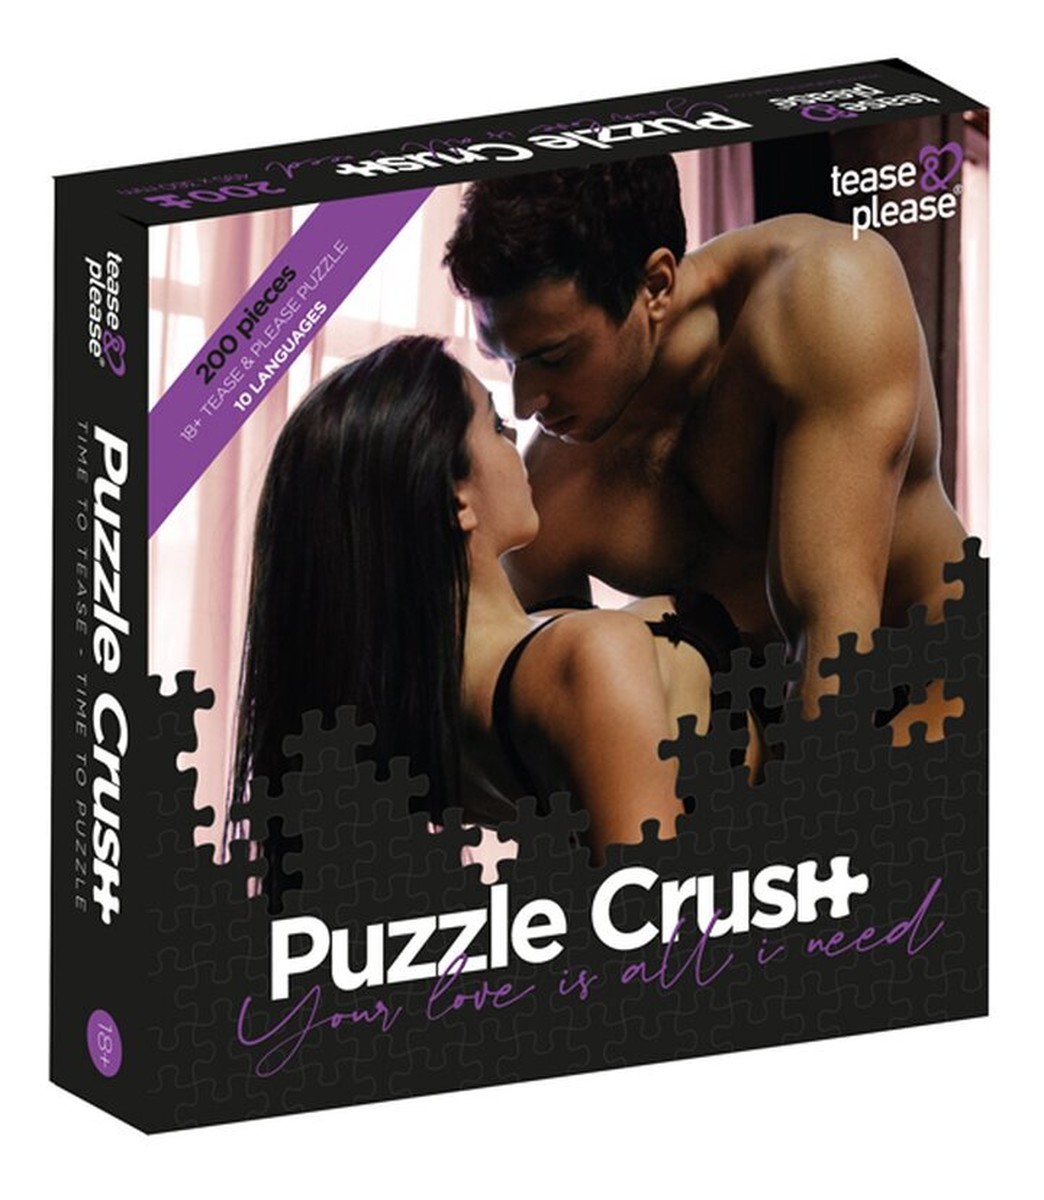 Puzzle crush your love is all i need puzzle erotyczne dla par 200 puzzli